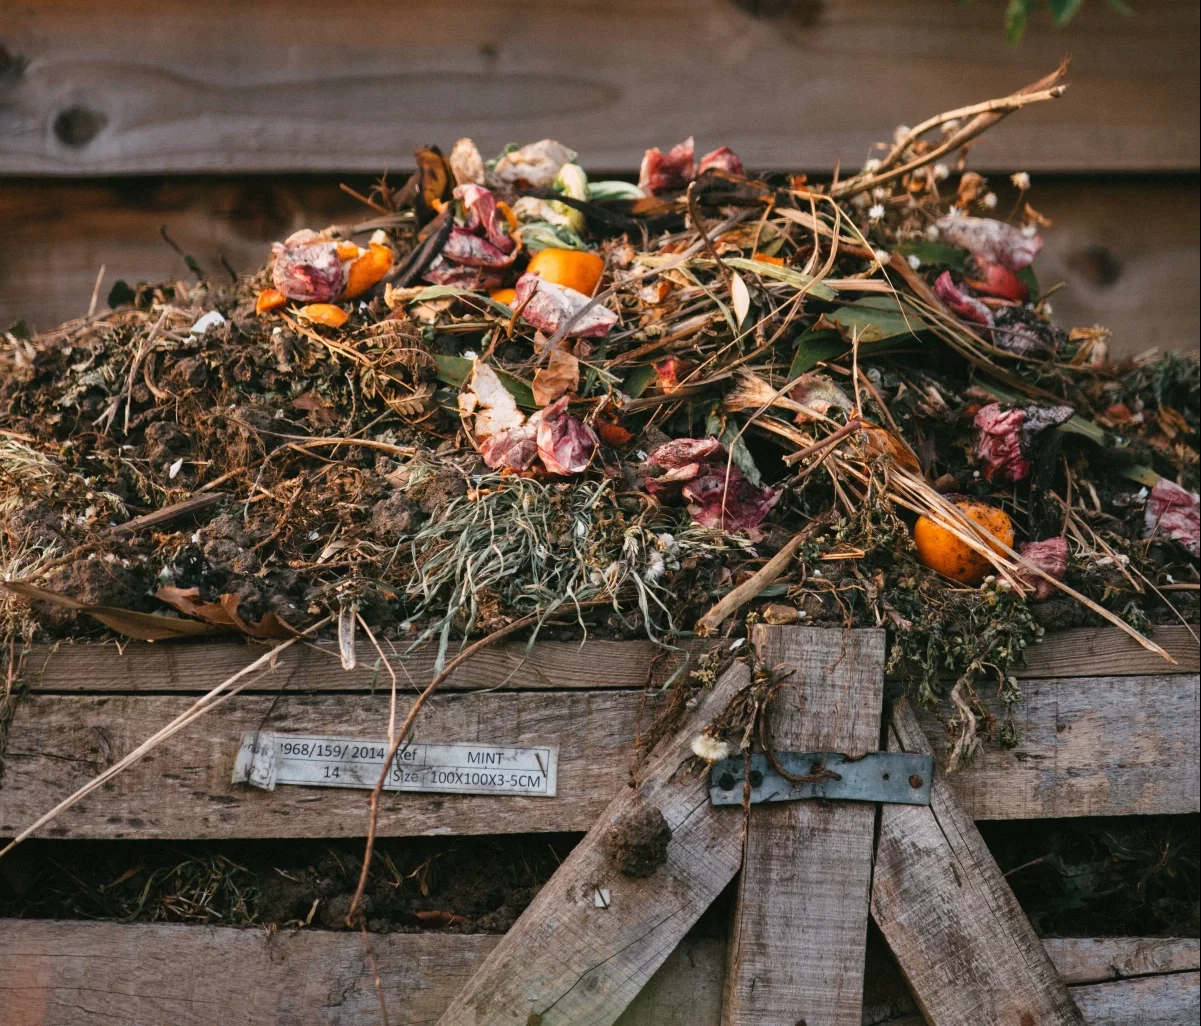 how to compost at home compost pile of food waste